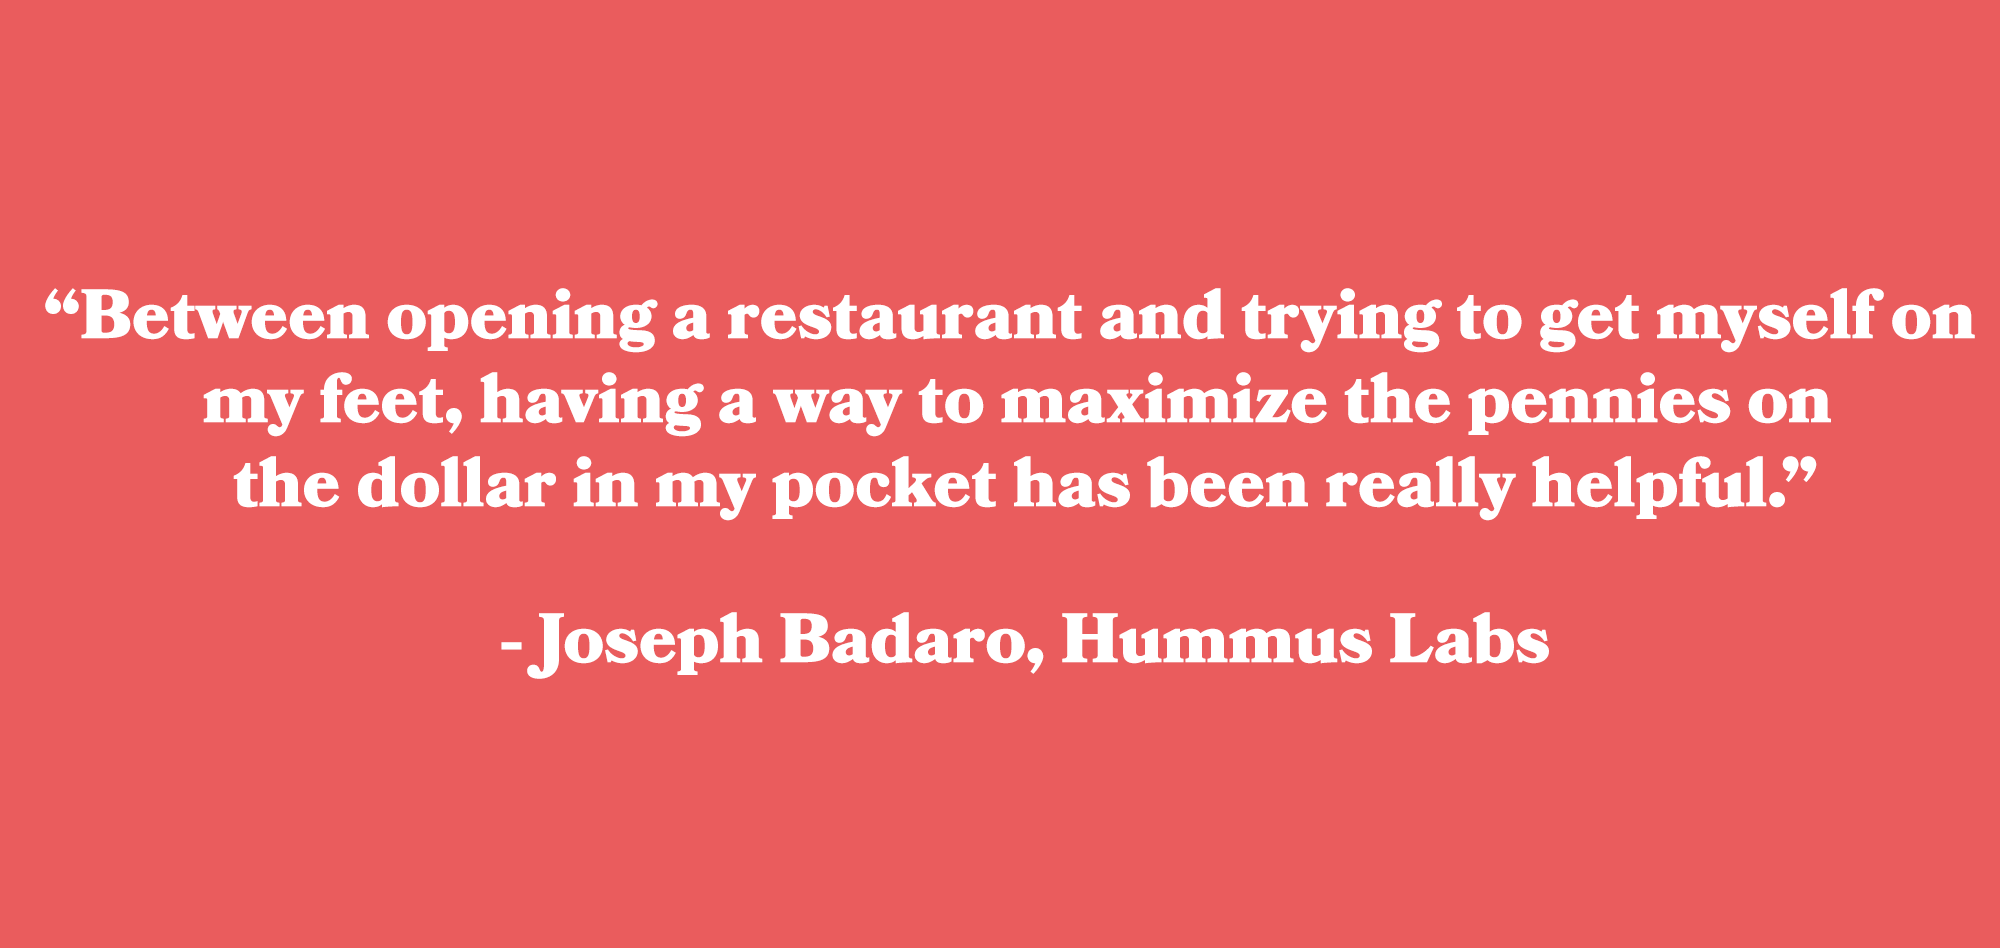 “Between opening a restaurant and trying to get myself on my feet, having a way to maximize the pennies on the dollar in my pocket has been really helpful.” - Joseph Badaro, Hummus Labs